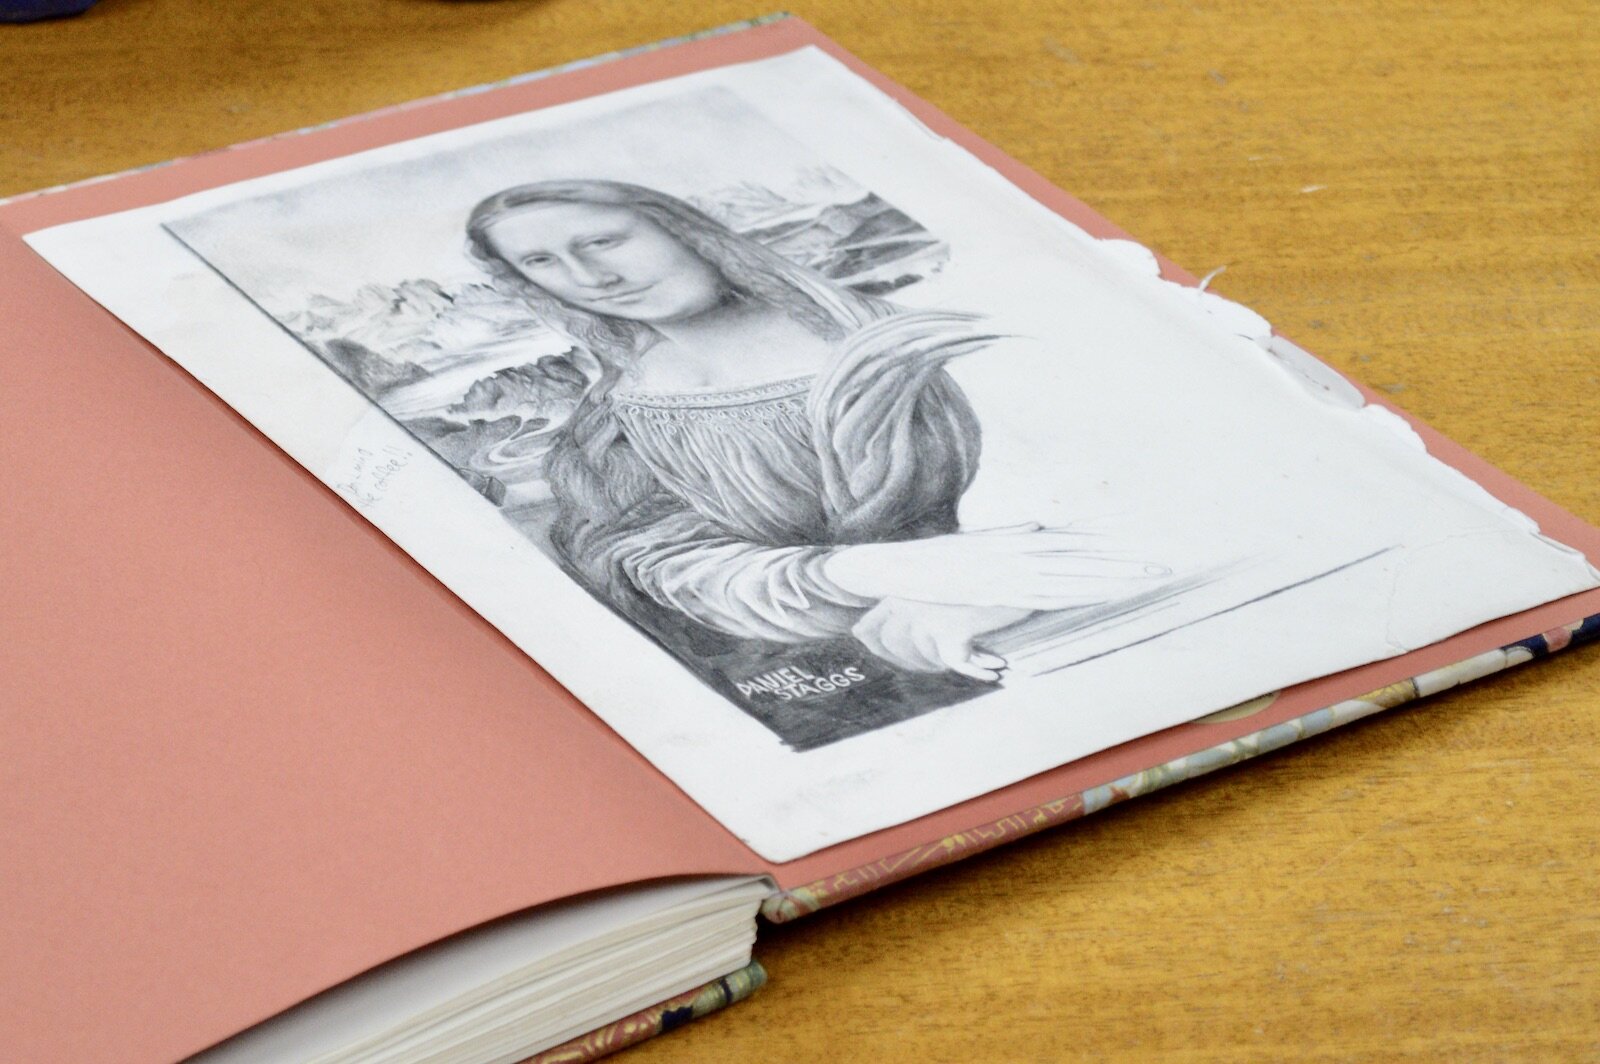 Mona Lisa in pencil by Daniel Staggs.